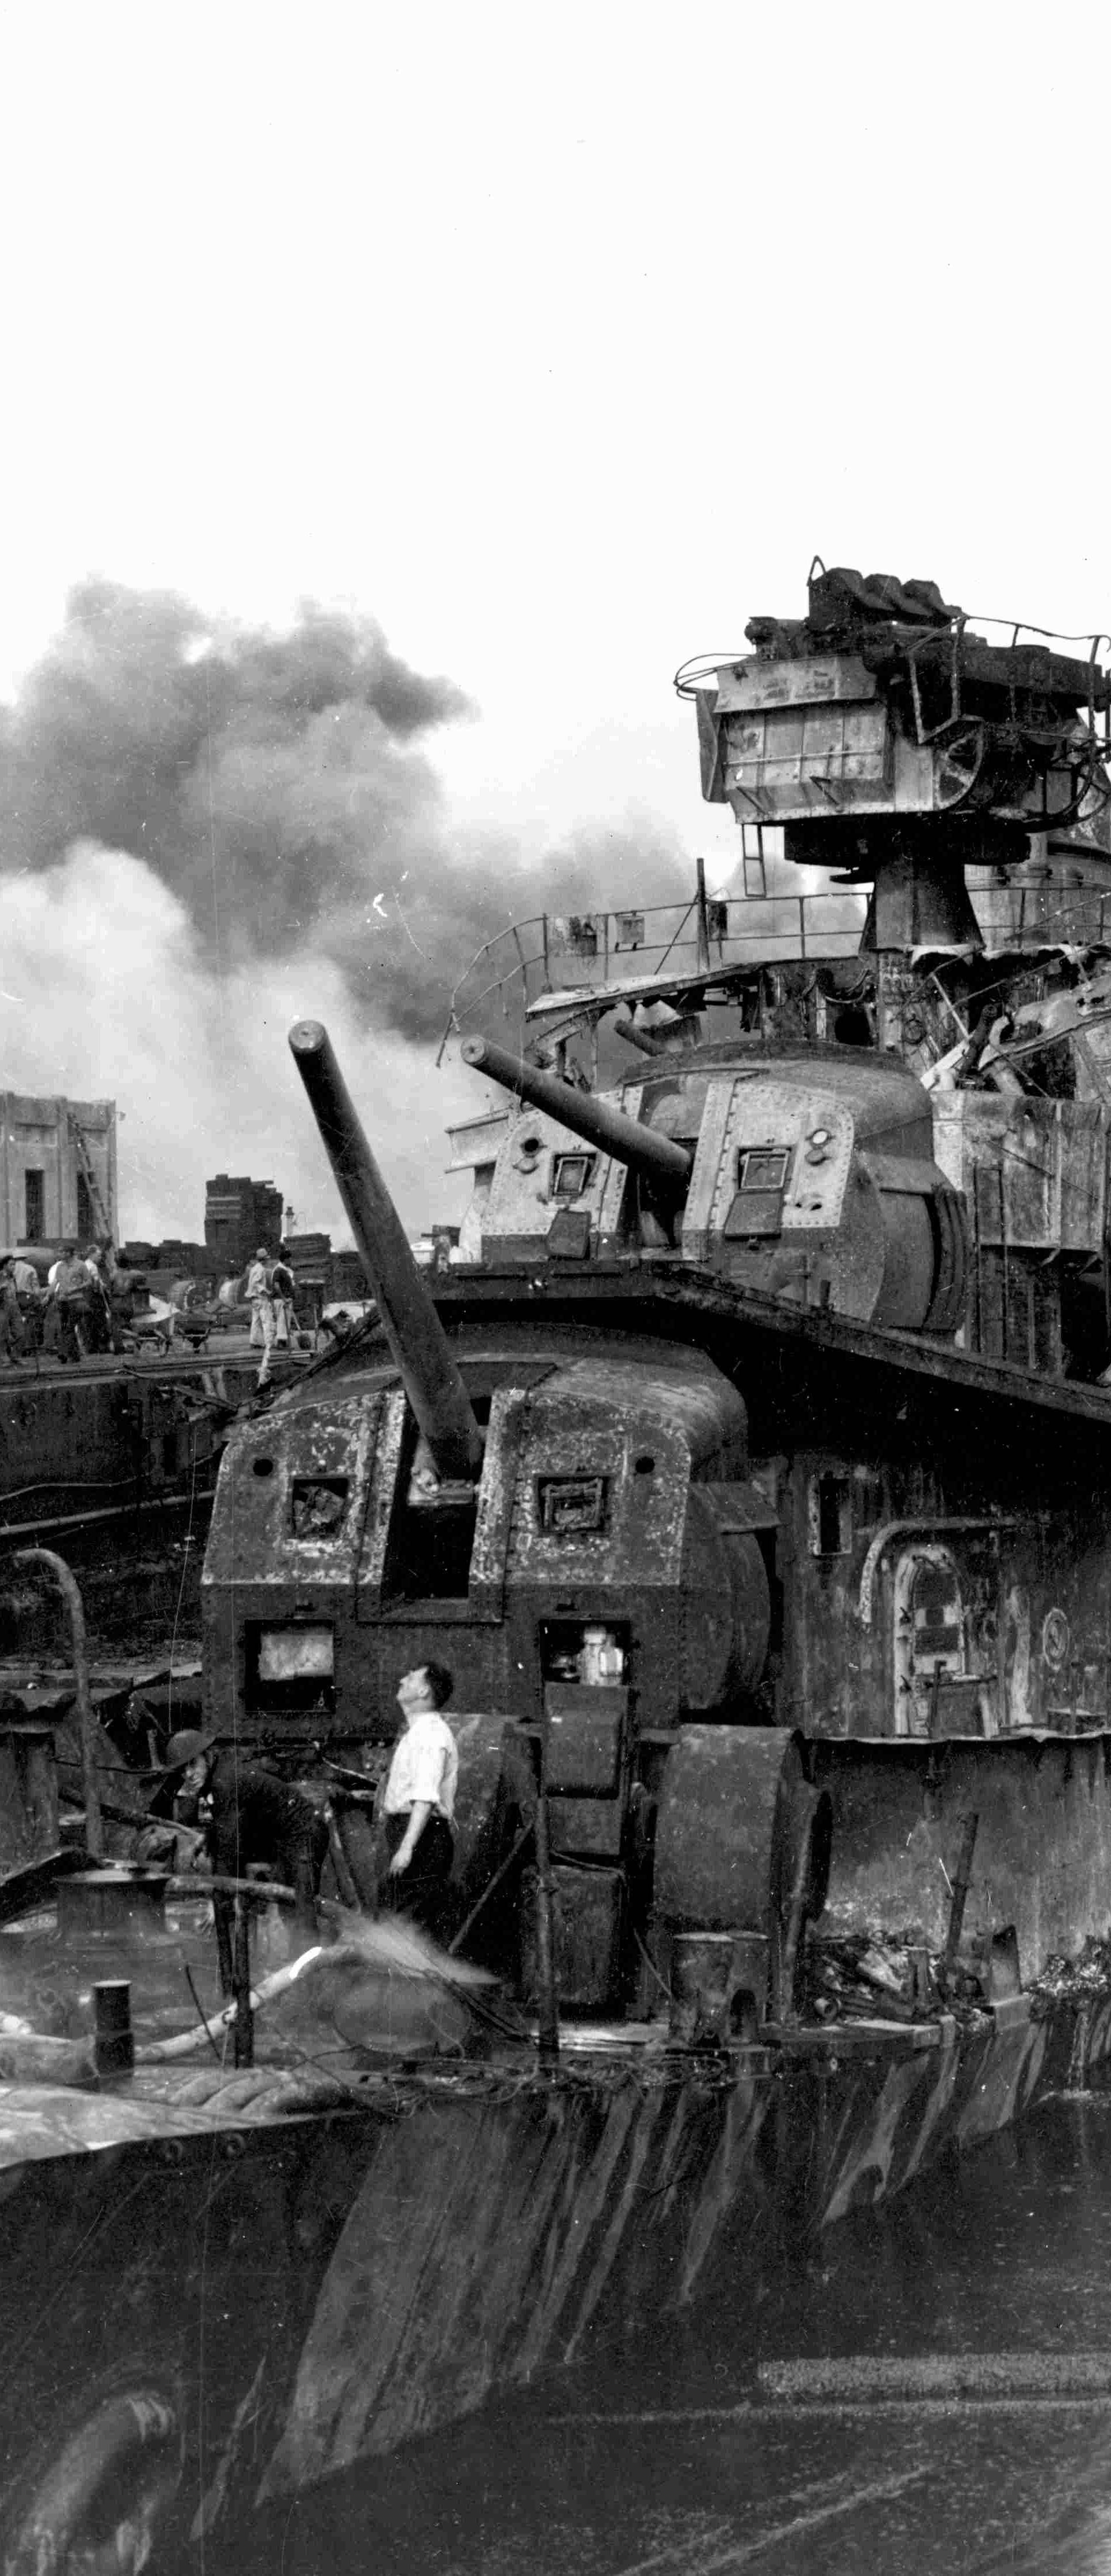 Archive photo of wrecked US Navy destroyers after the Pearl Harbor attack